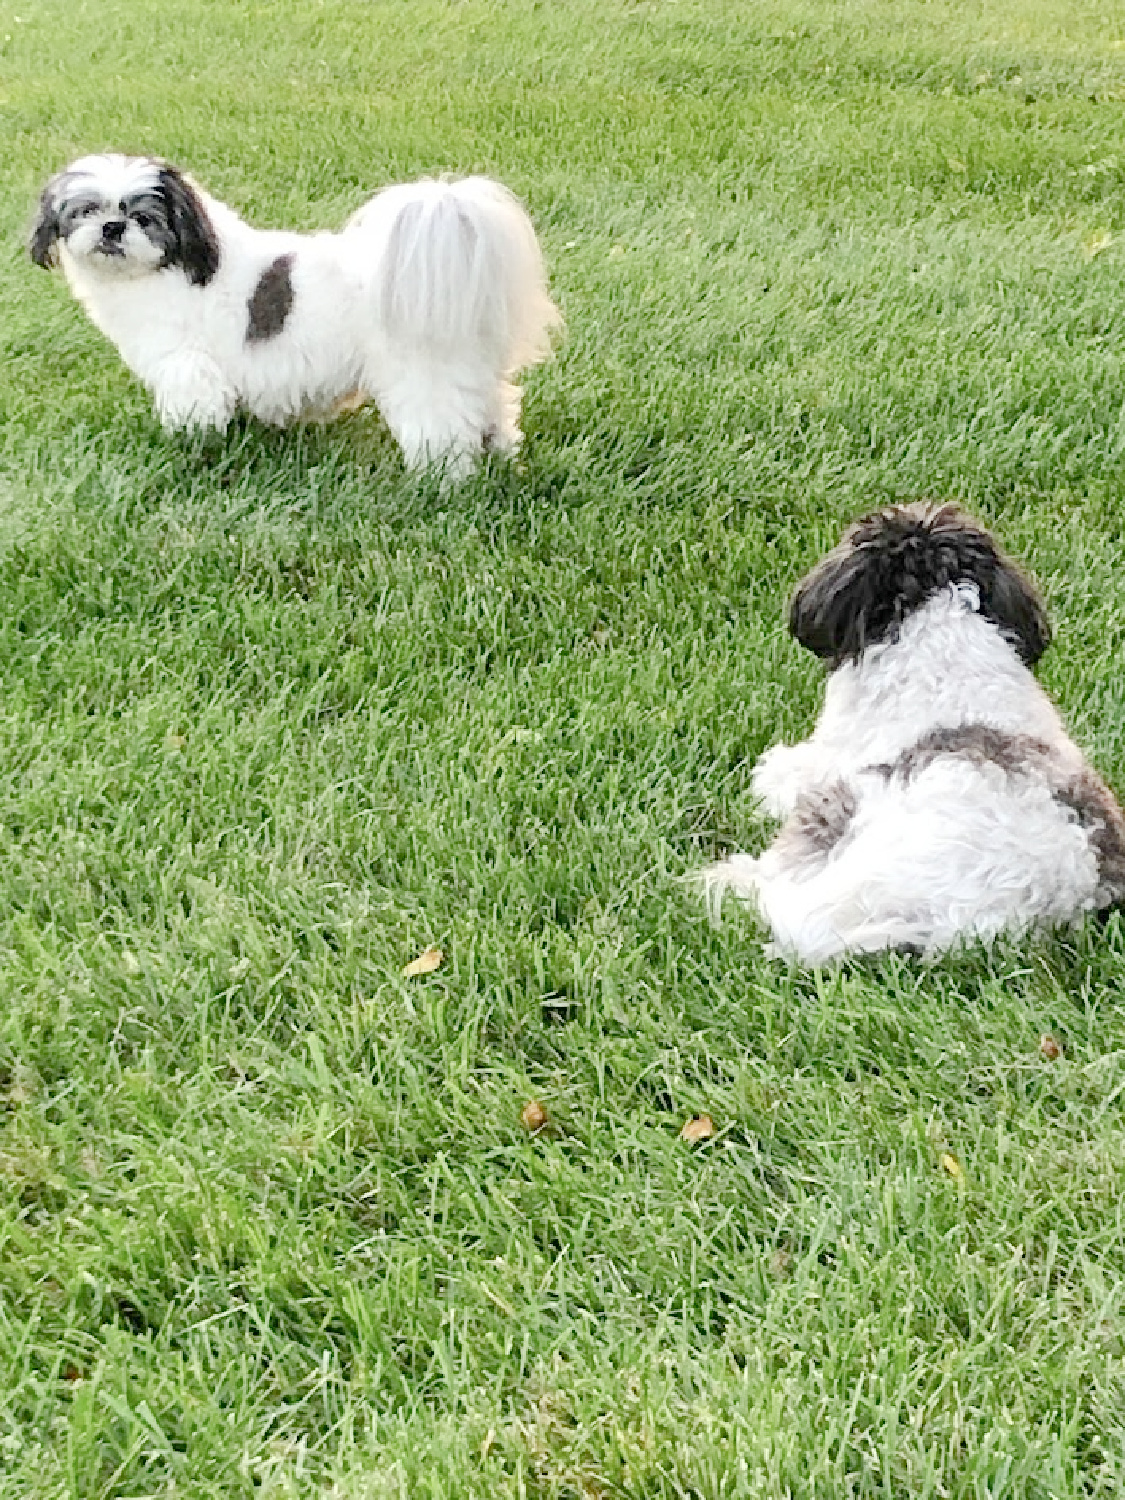 Black and white shih tzus in the backyard - Hello Lovely Studio.